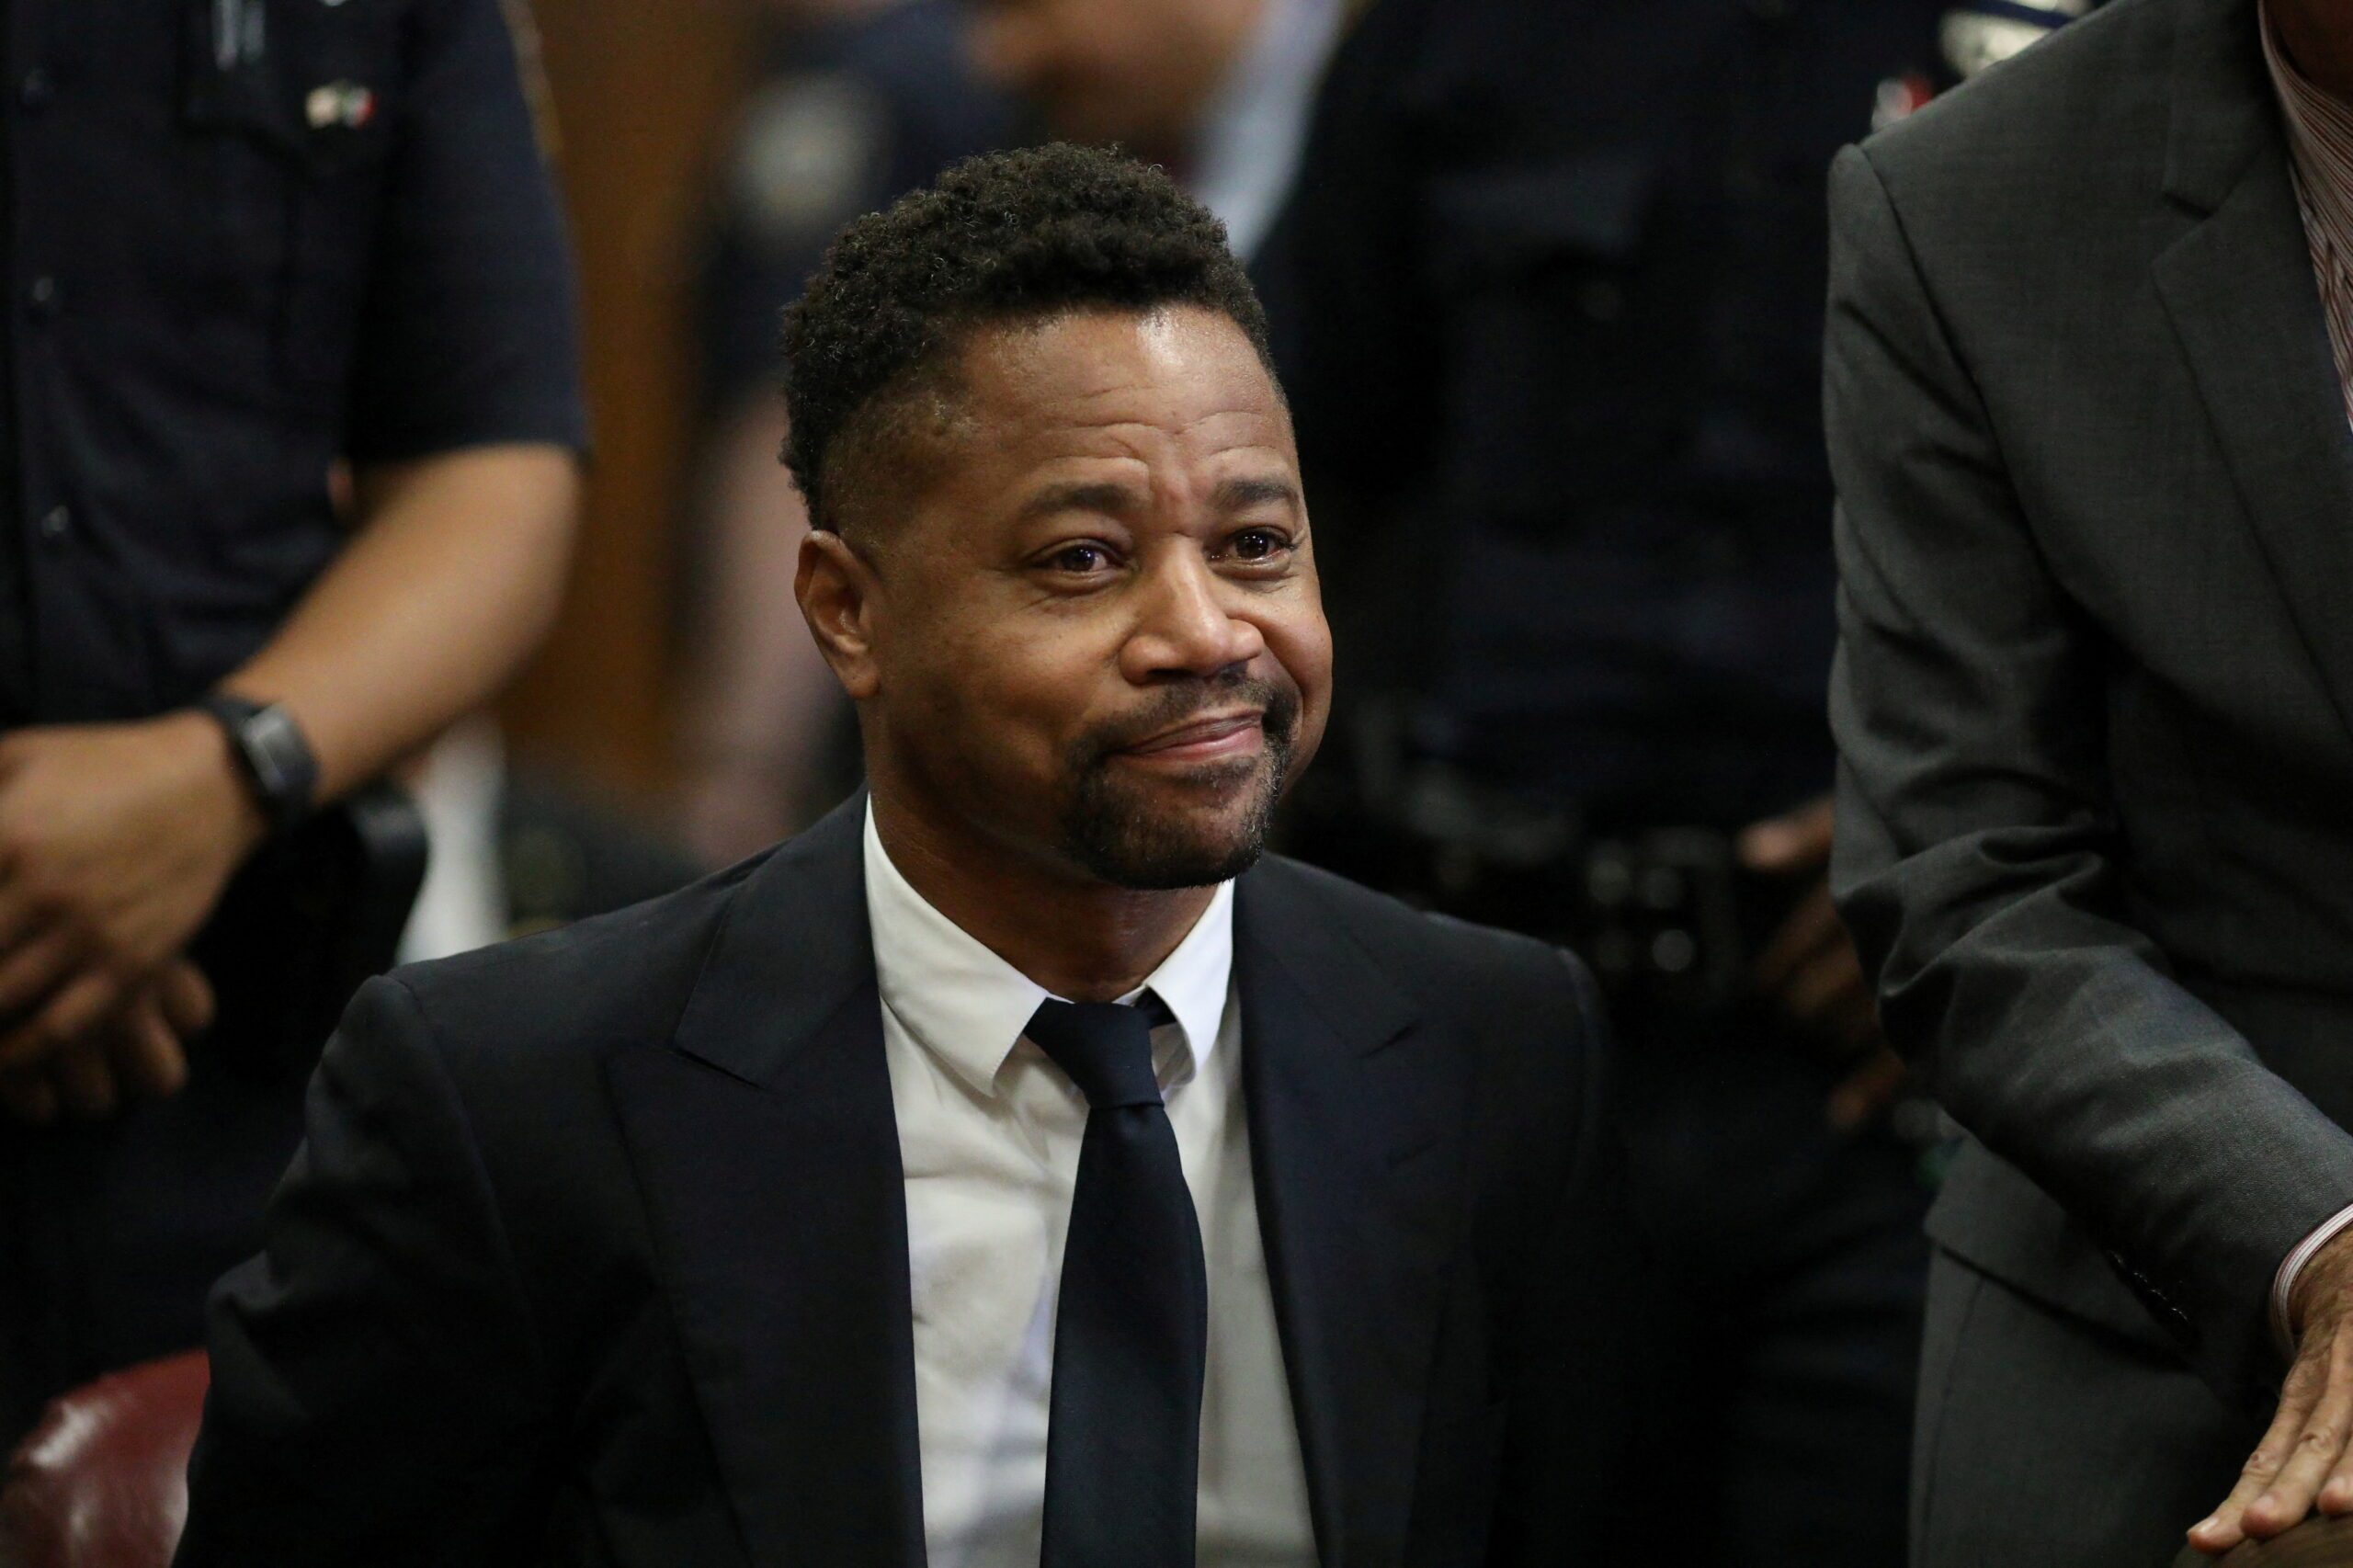 Cuba Gooding Jr. pleads guilty to forcible touching